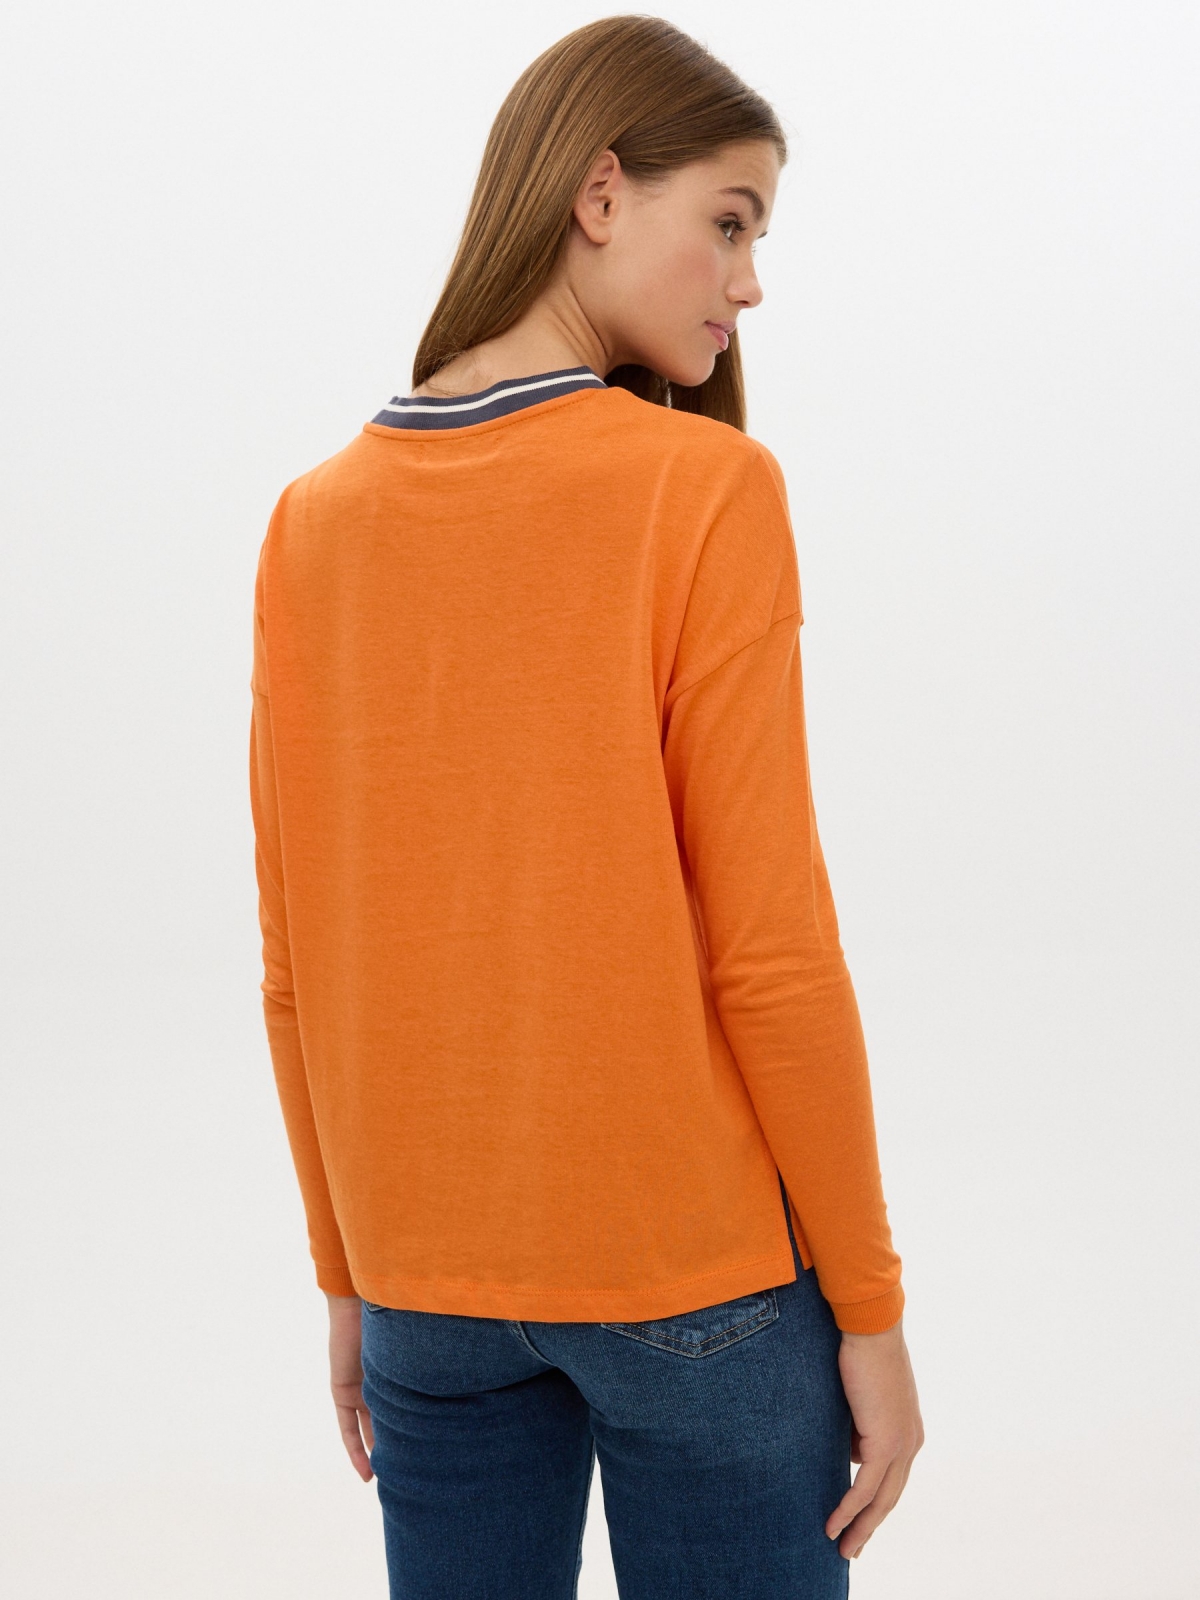 T-shirt with print orange middle back view